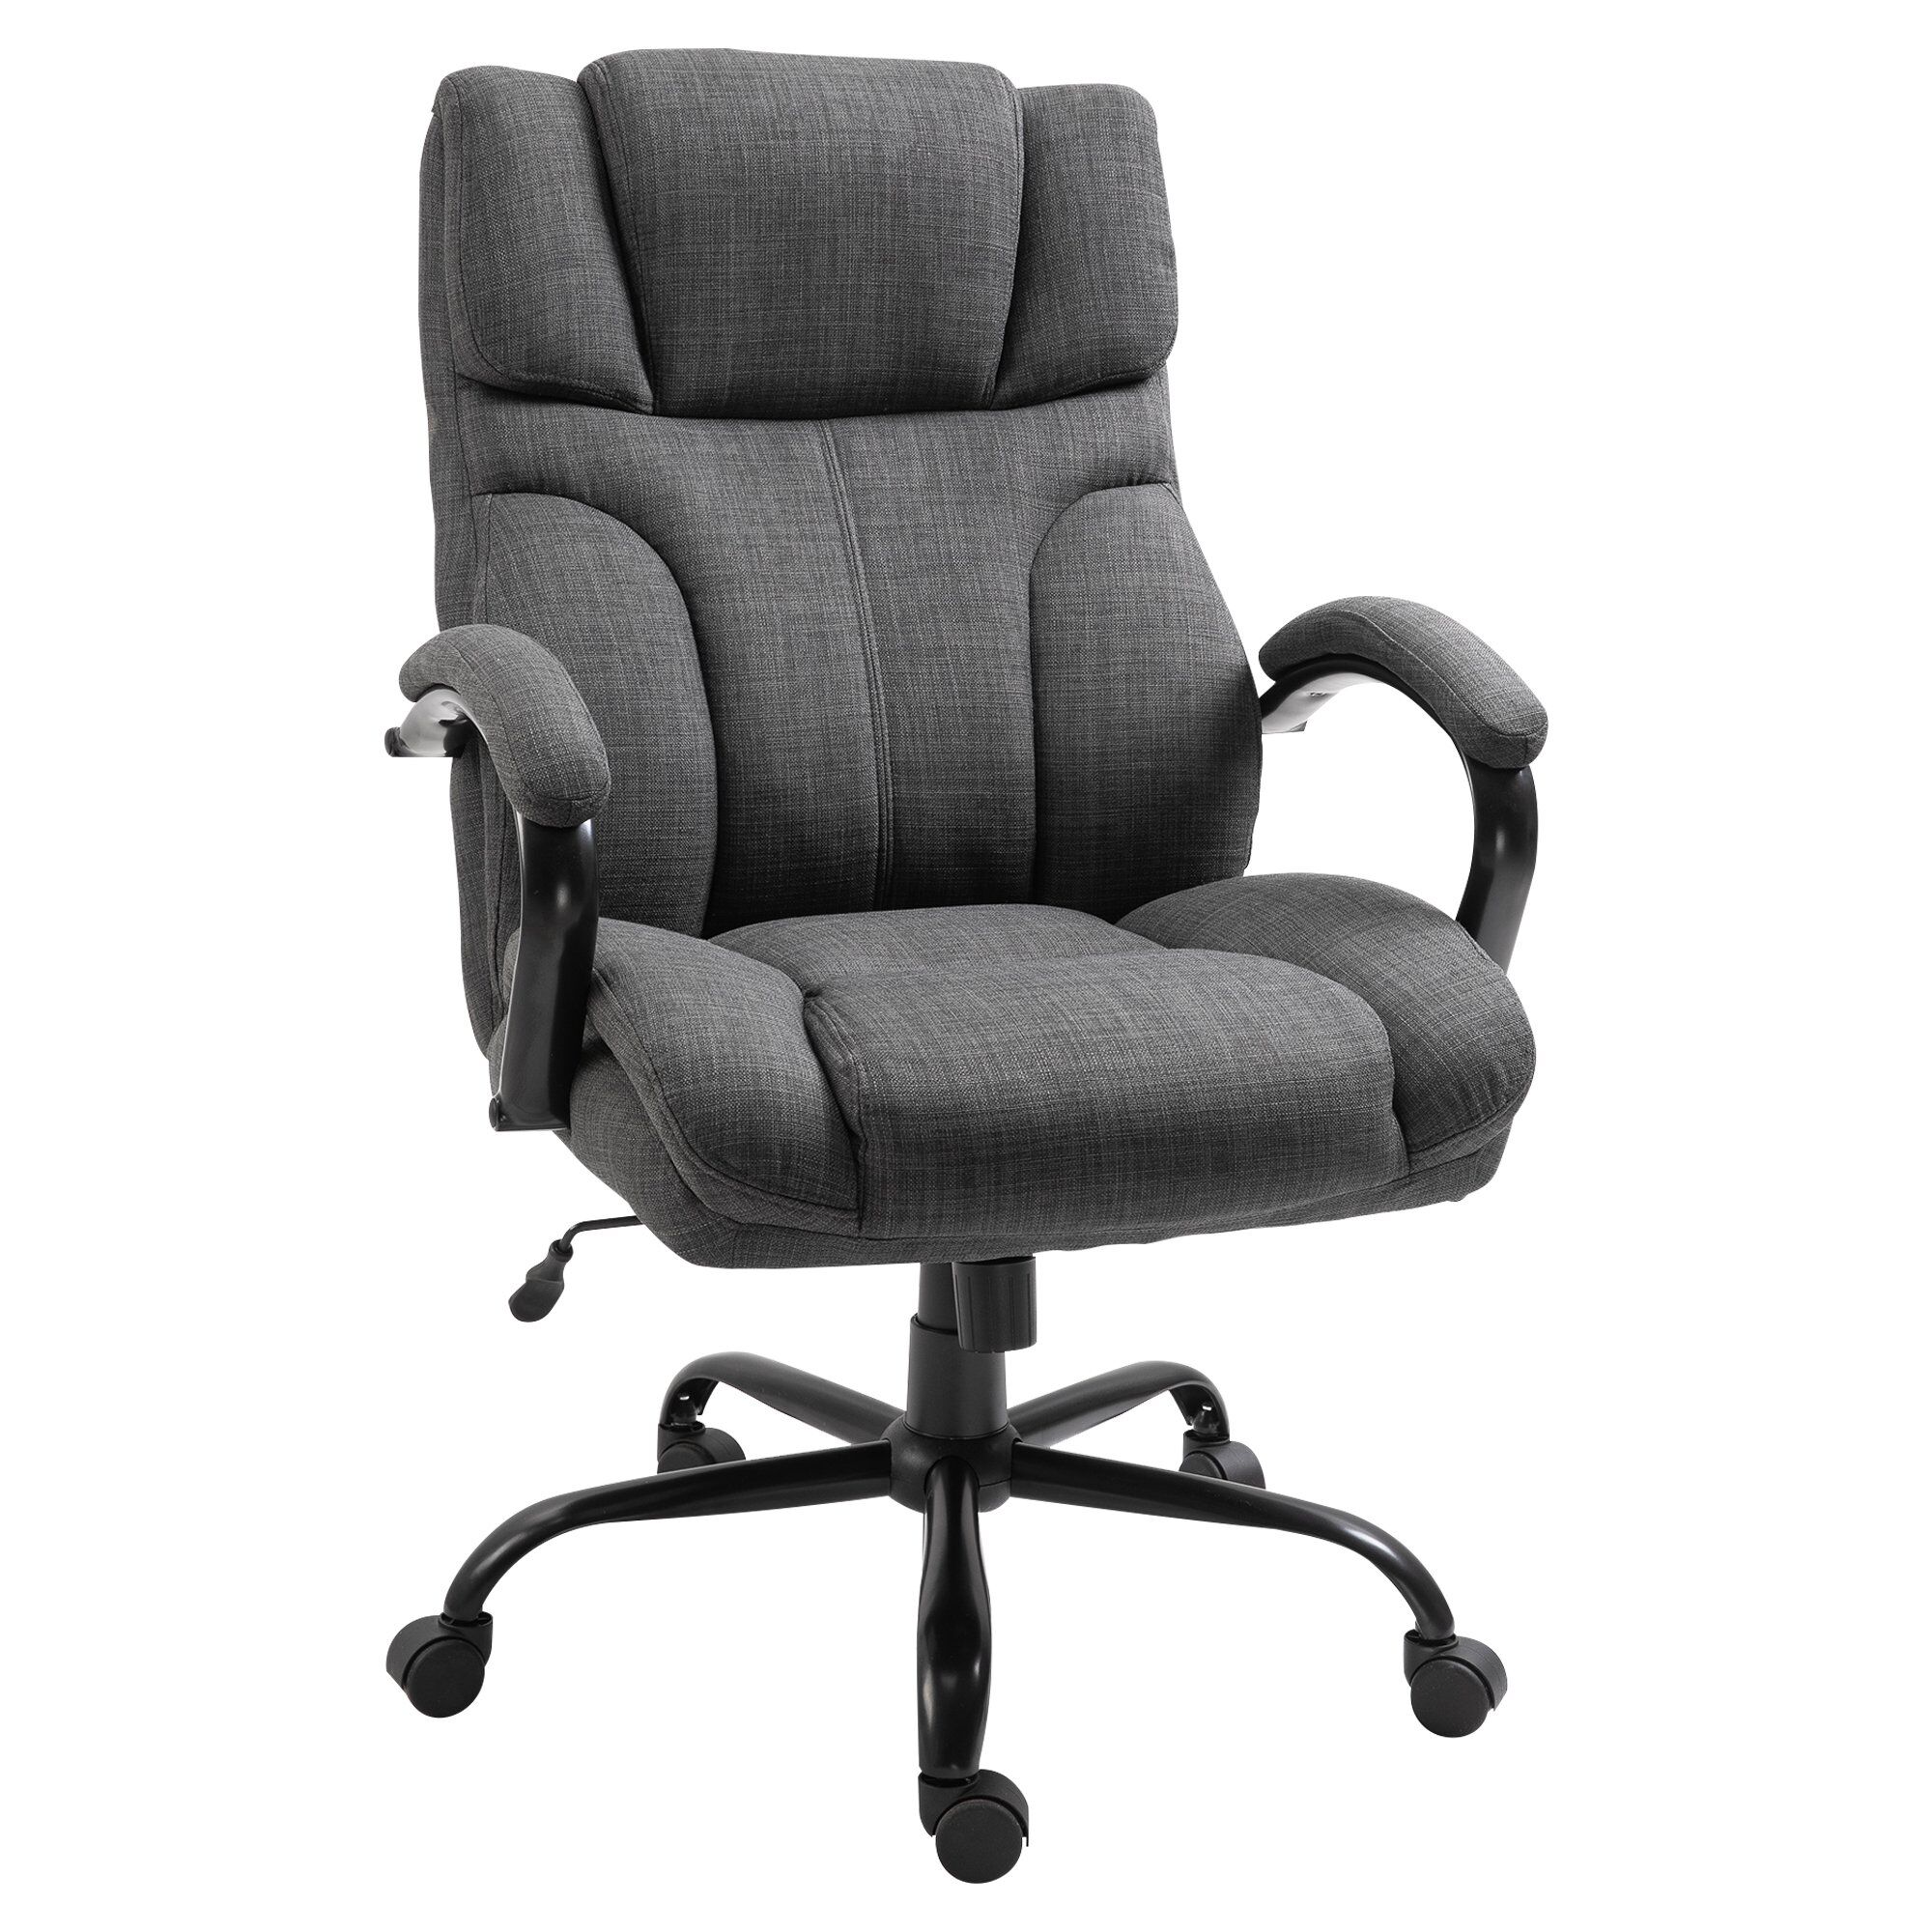 Vinsetto 500lbs Big and Tall Office Chair with Wide Seat, Ergonomic Executive Computer Chair with Swivel Wheels and Linen Finish, Dark Grey